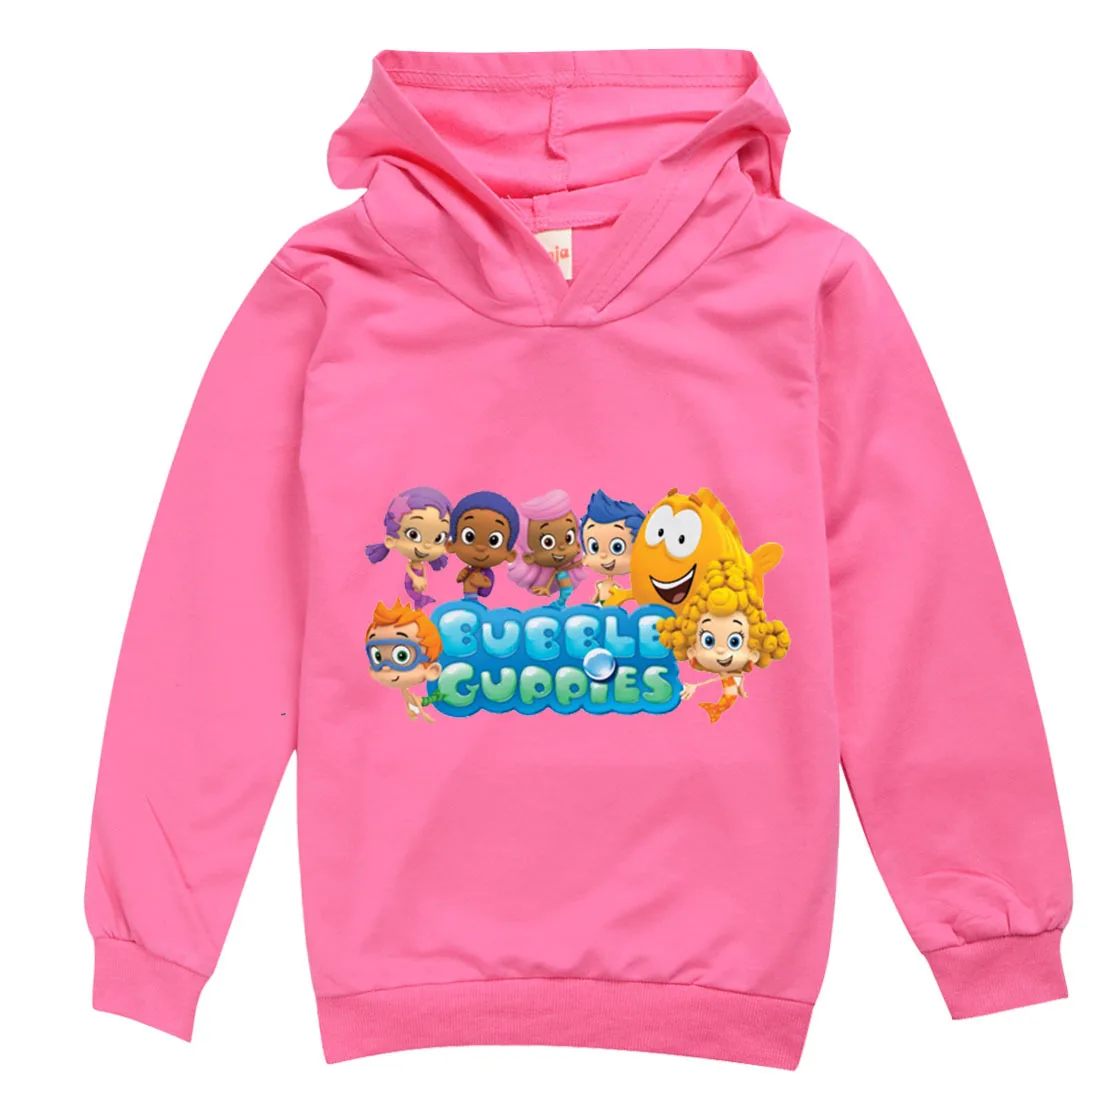 

Molly-Bubble Guppies Clothes Kids Hooded Sweatshirt Baby Girl Clothes Teen Boys Full Sleeve Sweater Children Casual Clothing Tee